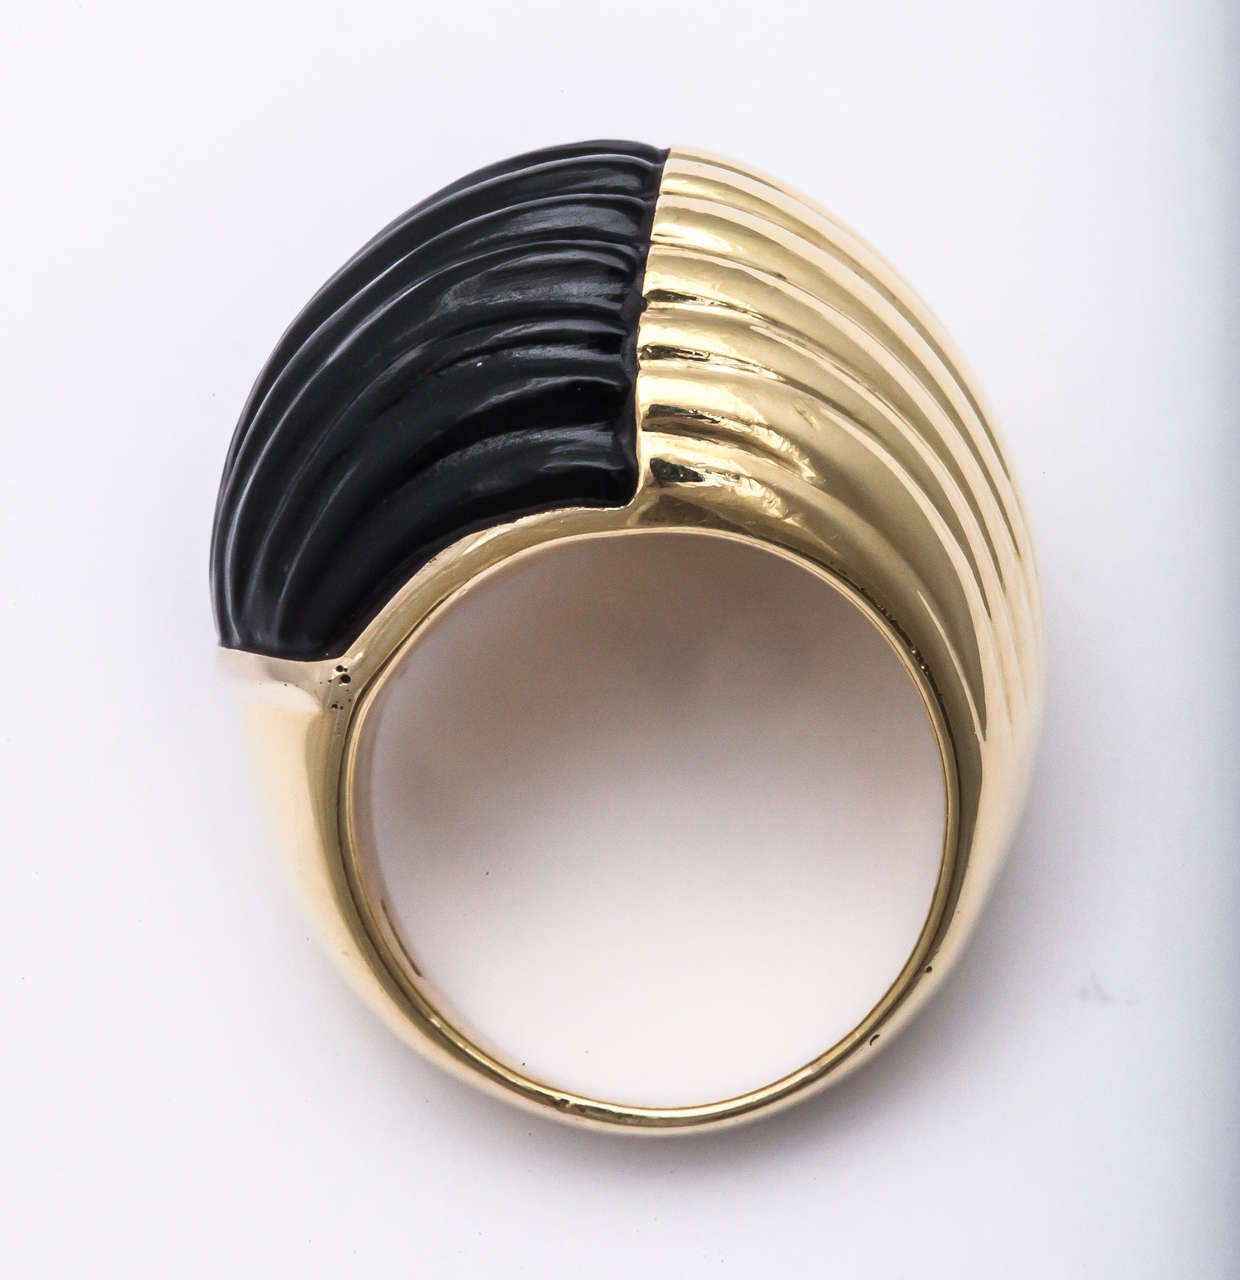 This is that one big bold Ring to wear as a signature piece.  Half Black ribbed & half Striated Yellow Gold. Noticeable and impressive. Size 7 - but can be sized.